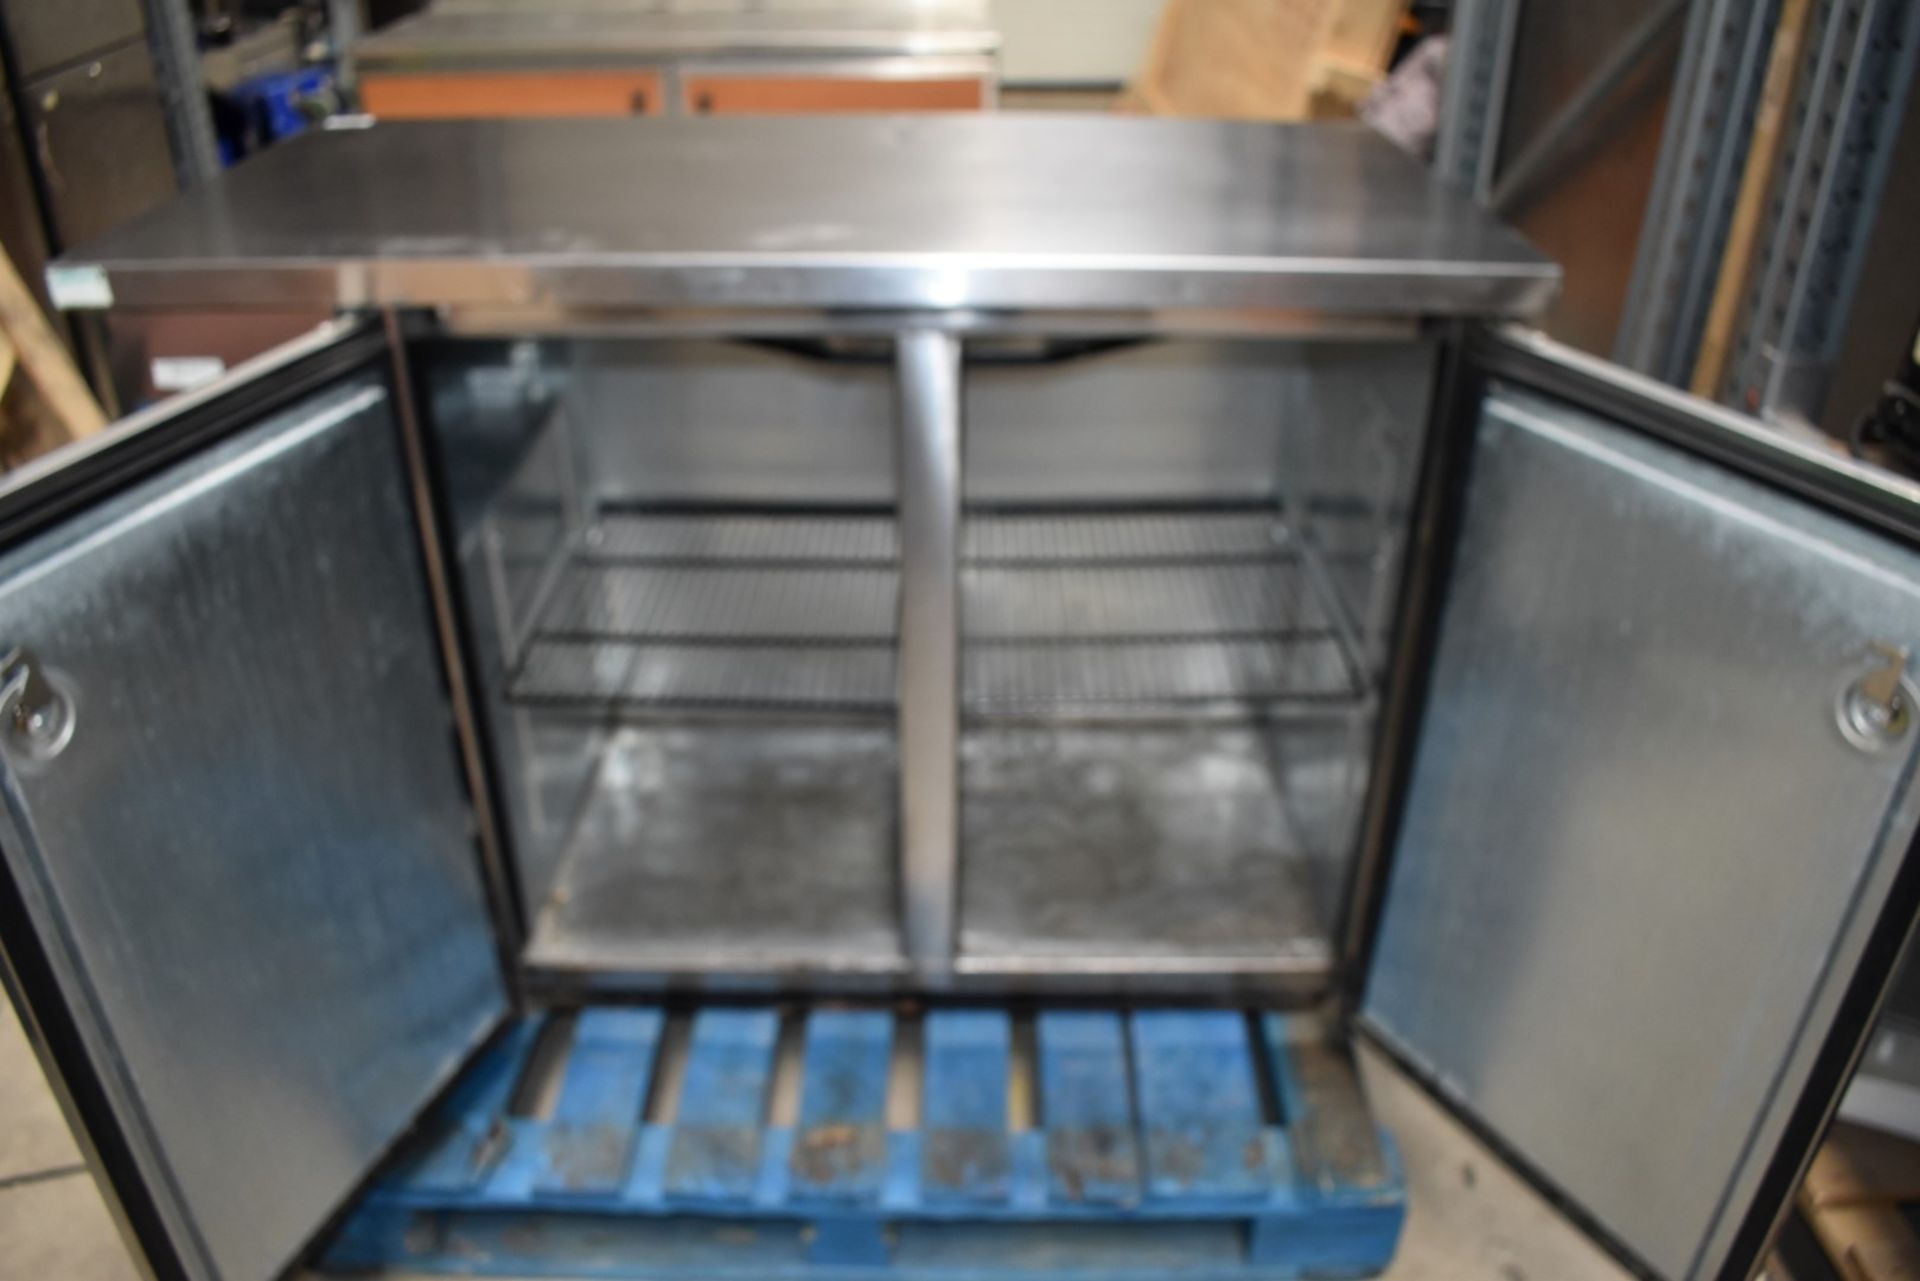 1 x True Back Bar Bottle Cooler With Solid Stainless Steel Doors and Counter Top - Model TBB-24-48-S - Image 8 of 10